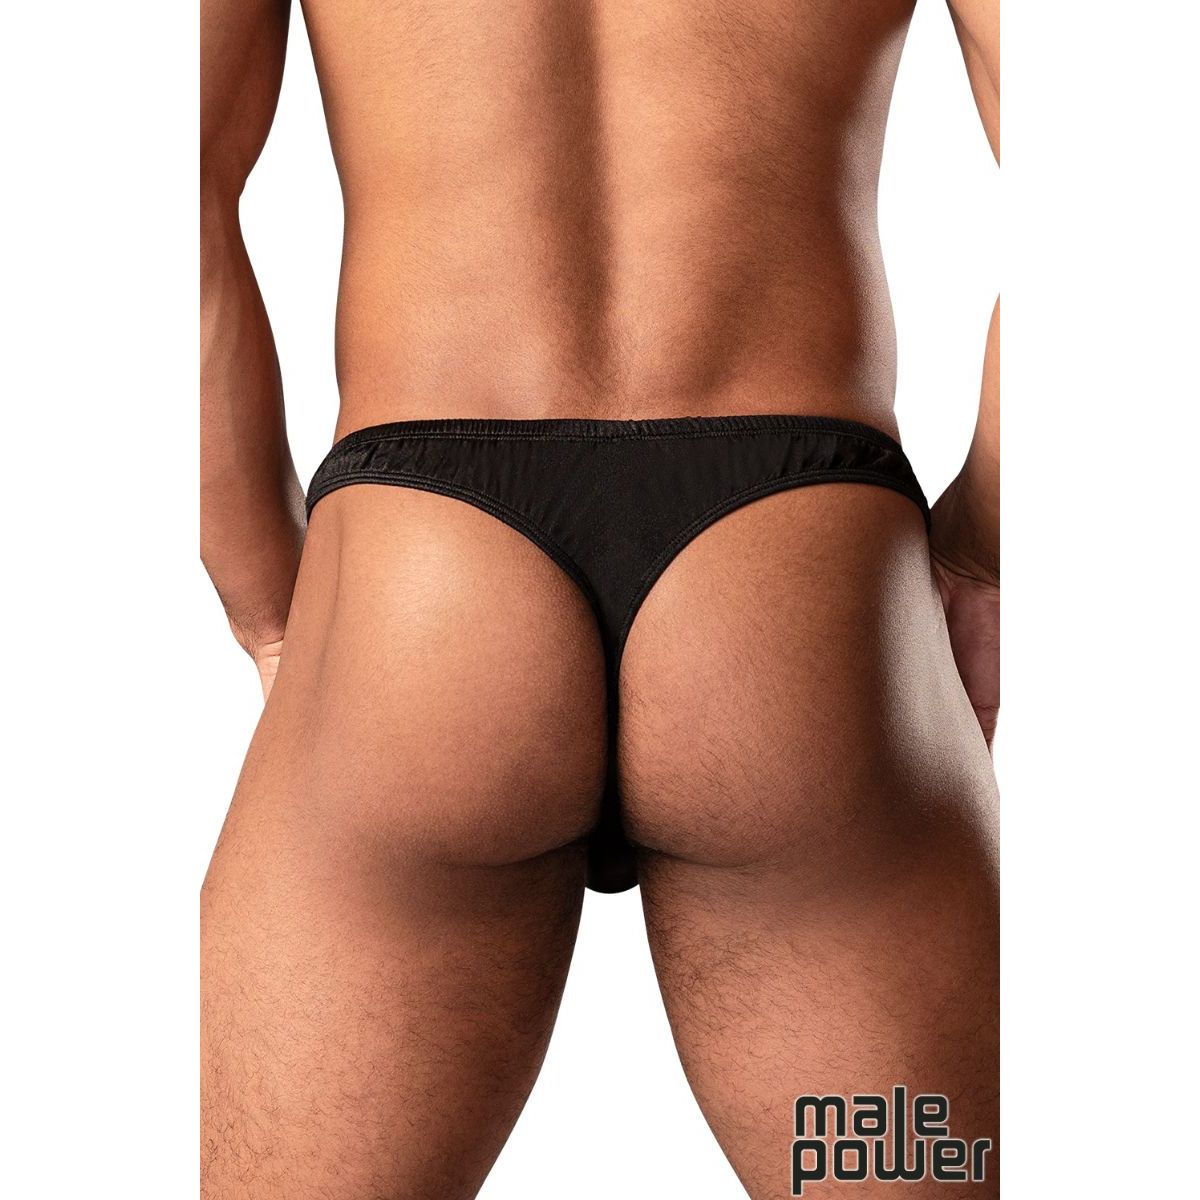 4 Clip Men's Thong by Male Power